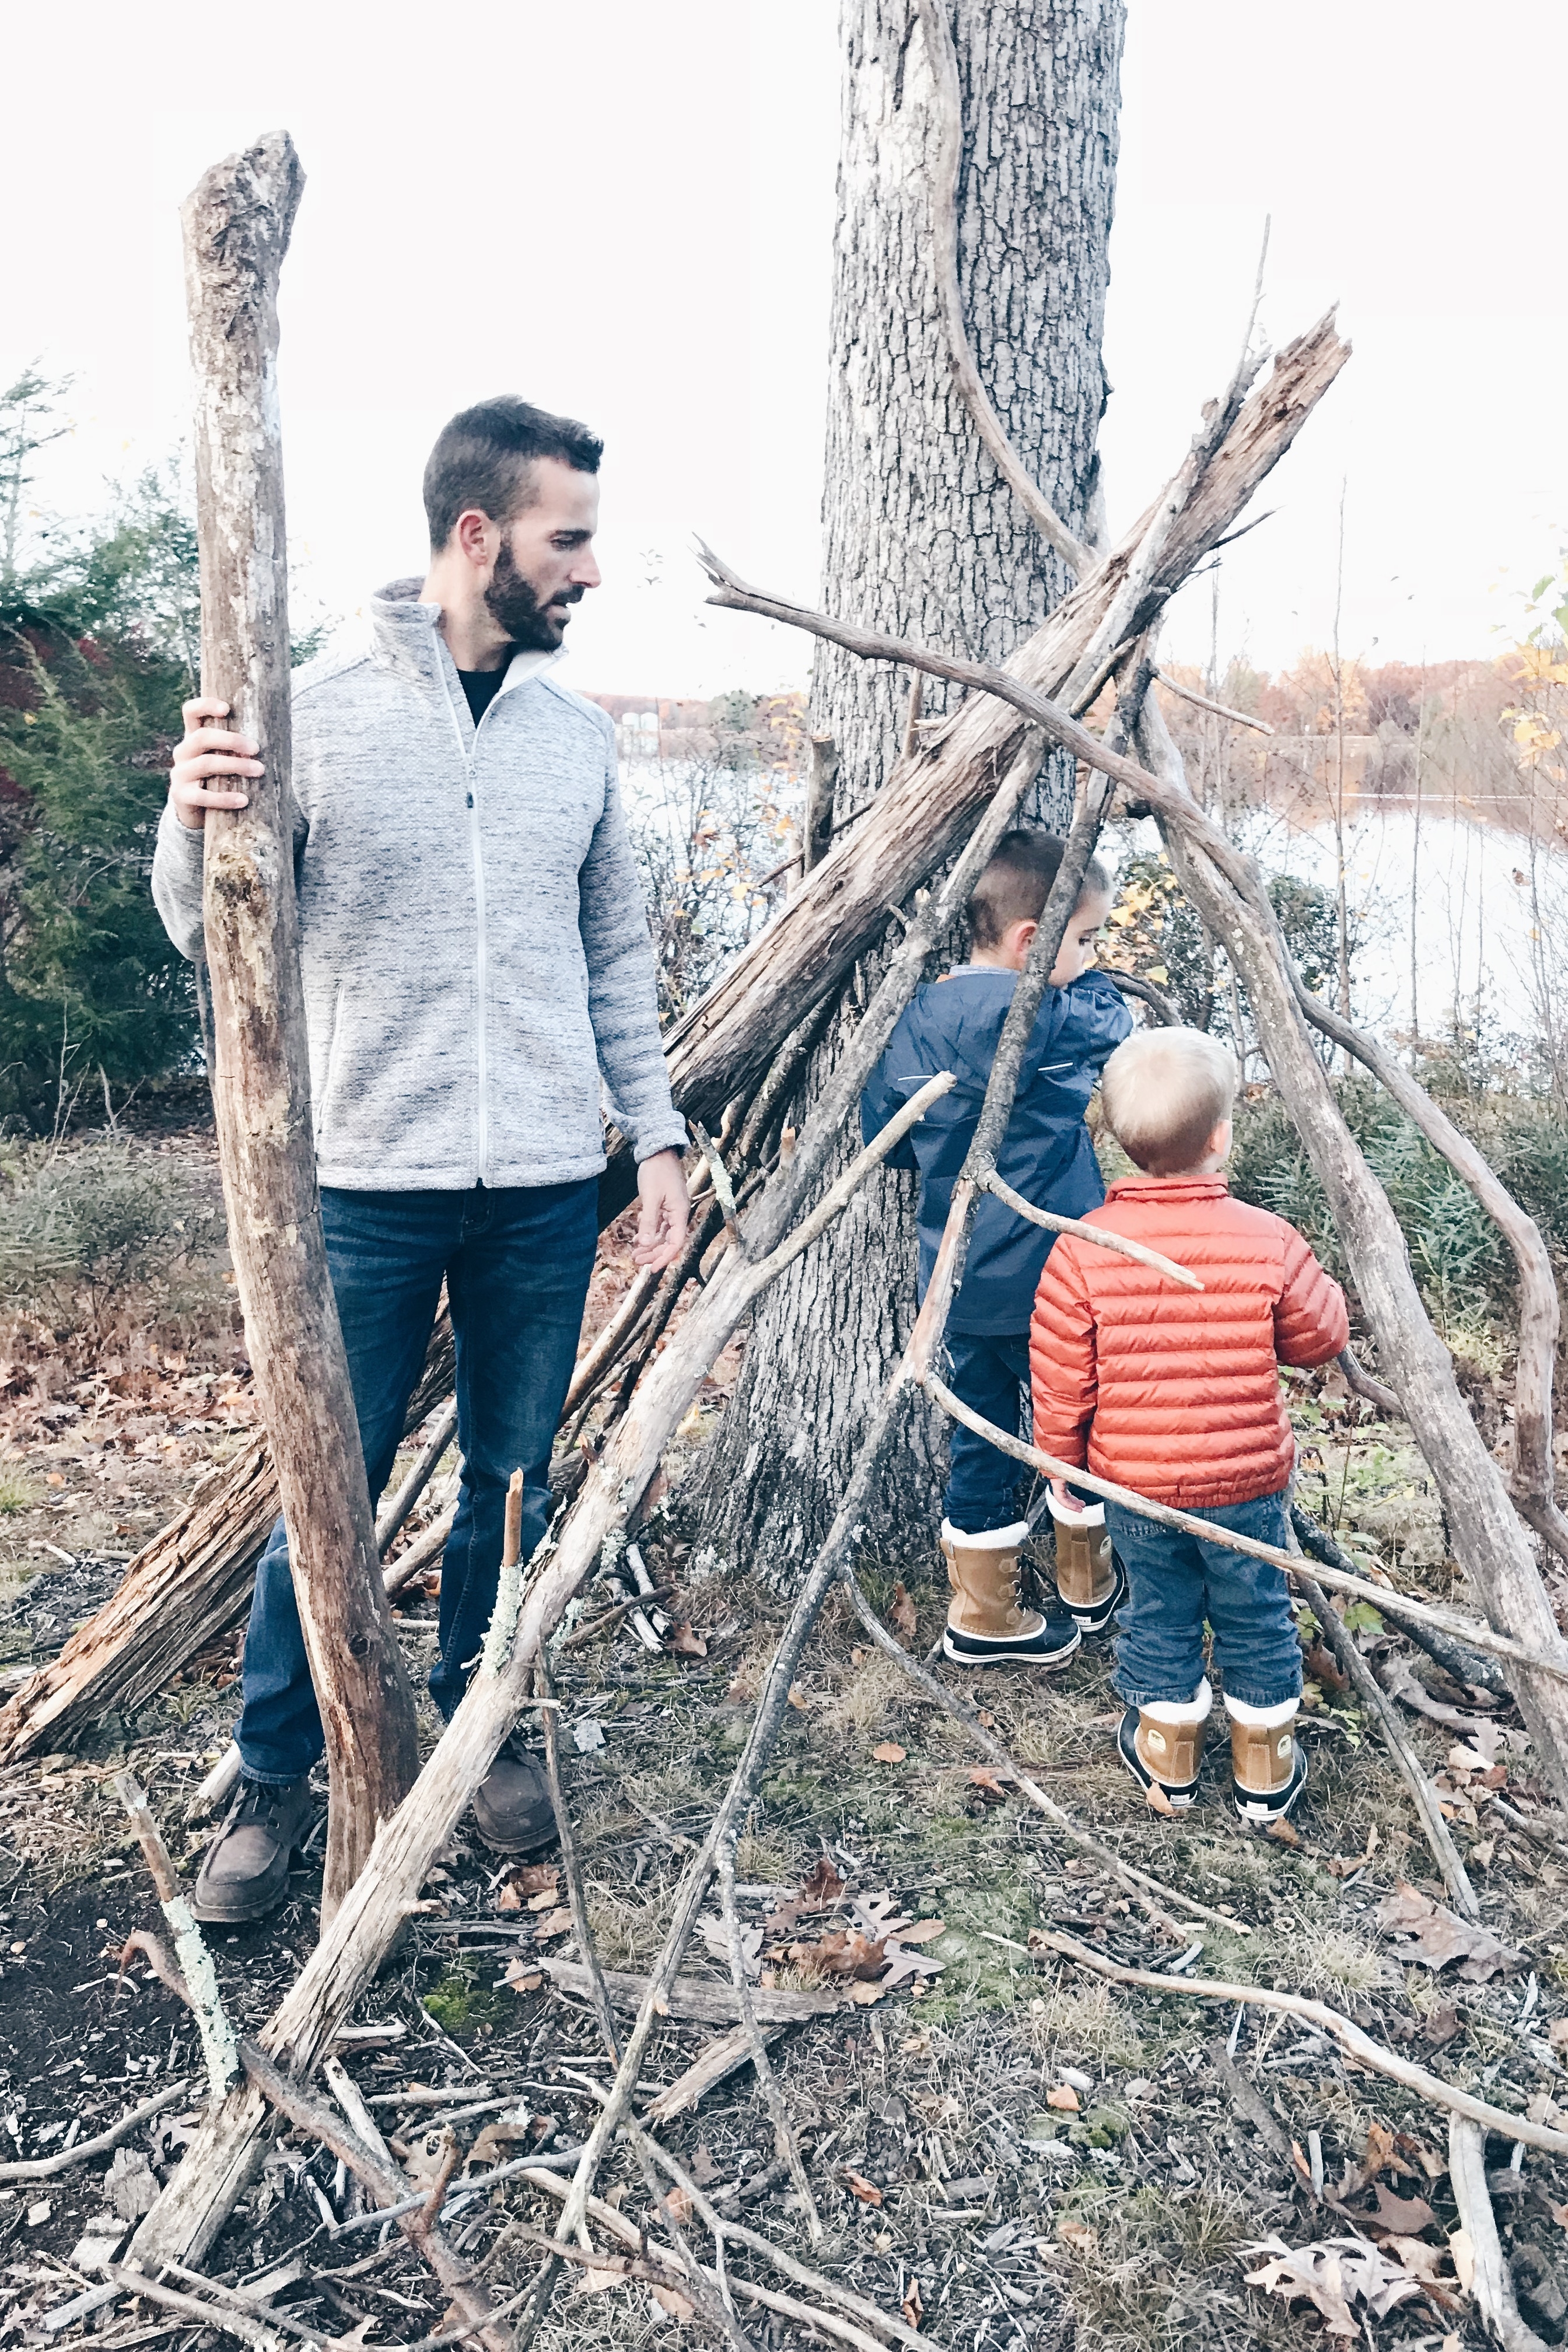  fall layers for the family - boys playing outdoors pinteresting plans fashion blog